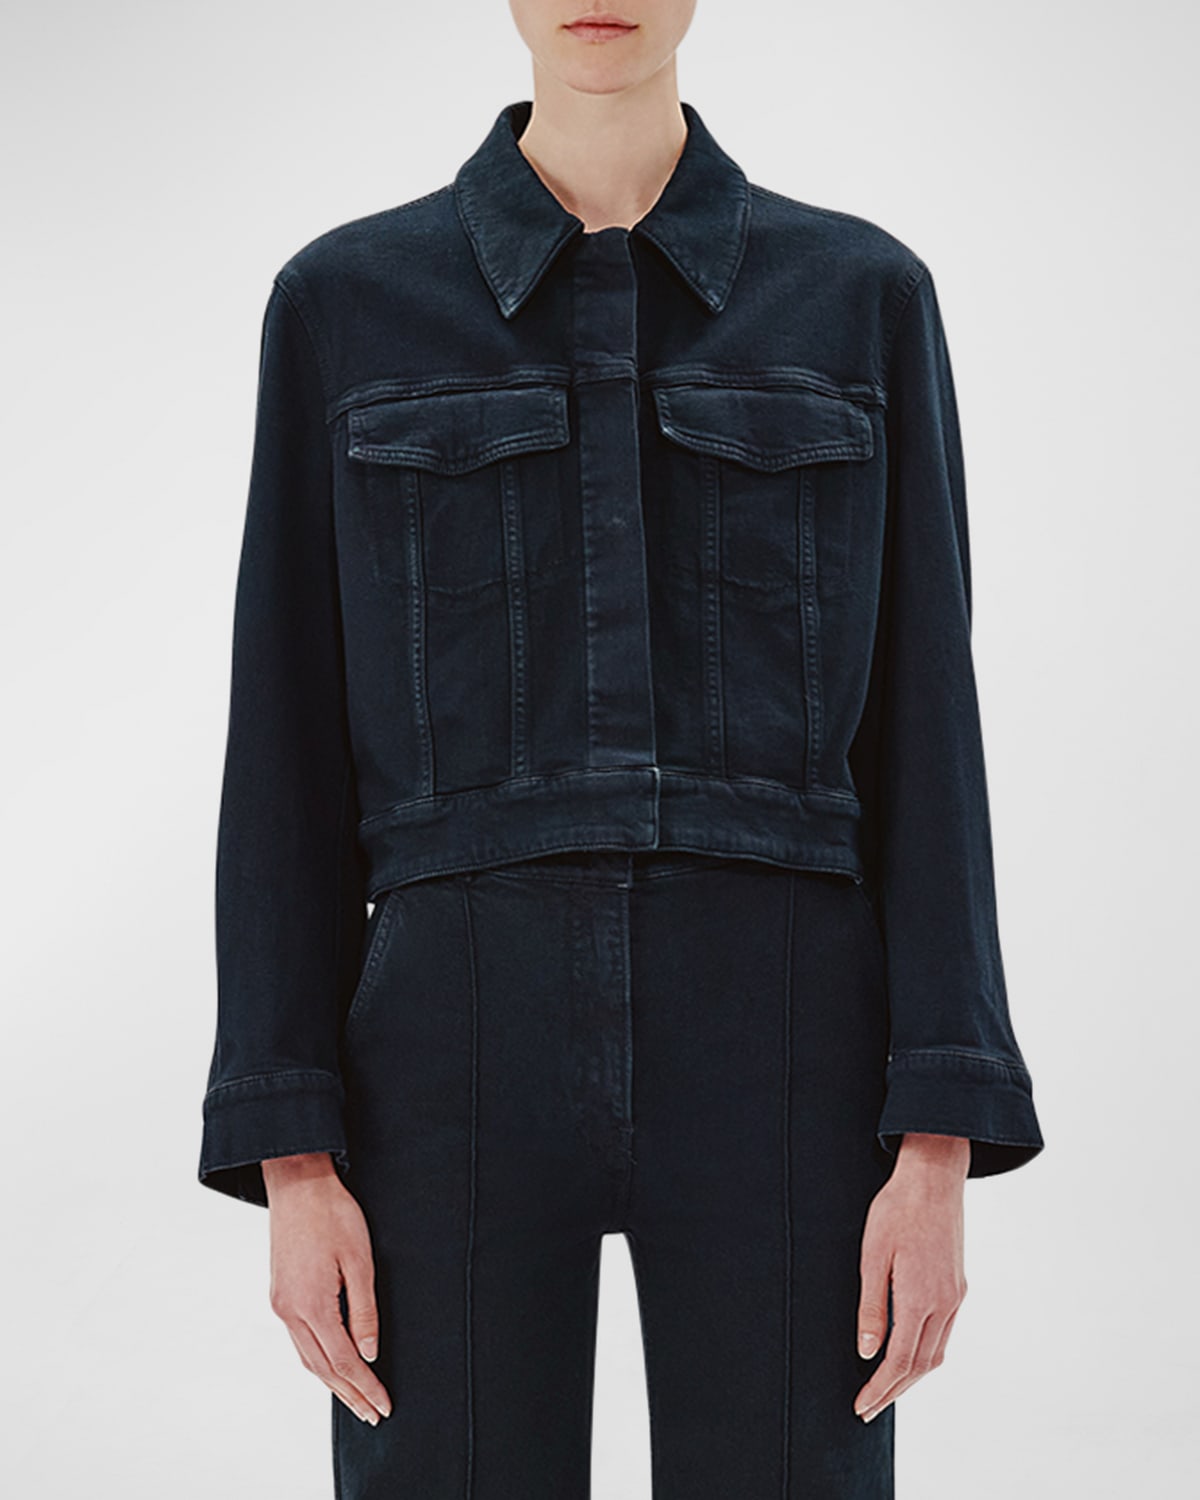 Another Tomorrow Cropped Denim Jacket In Overdye Black